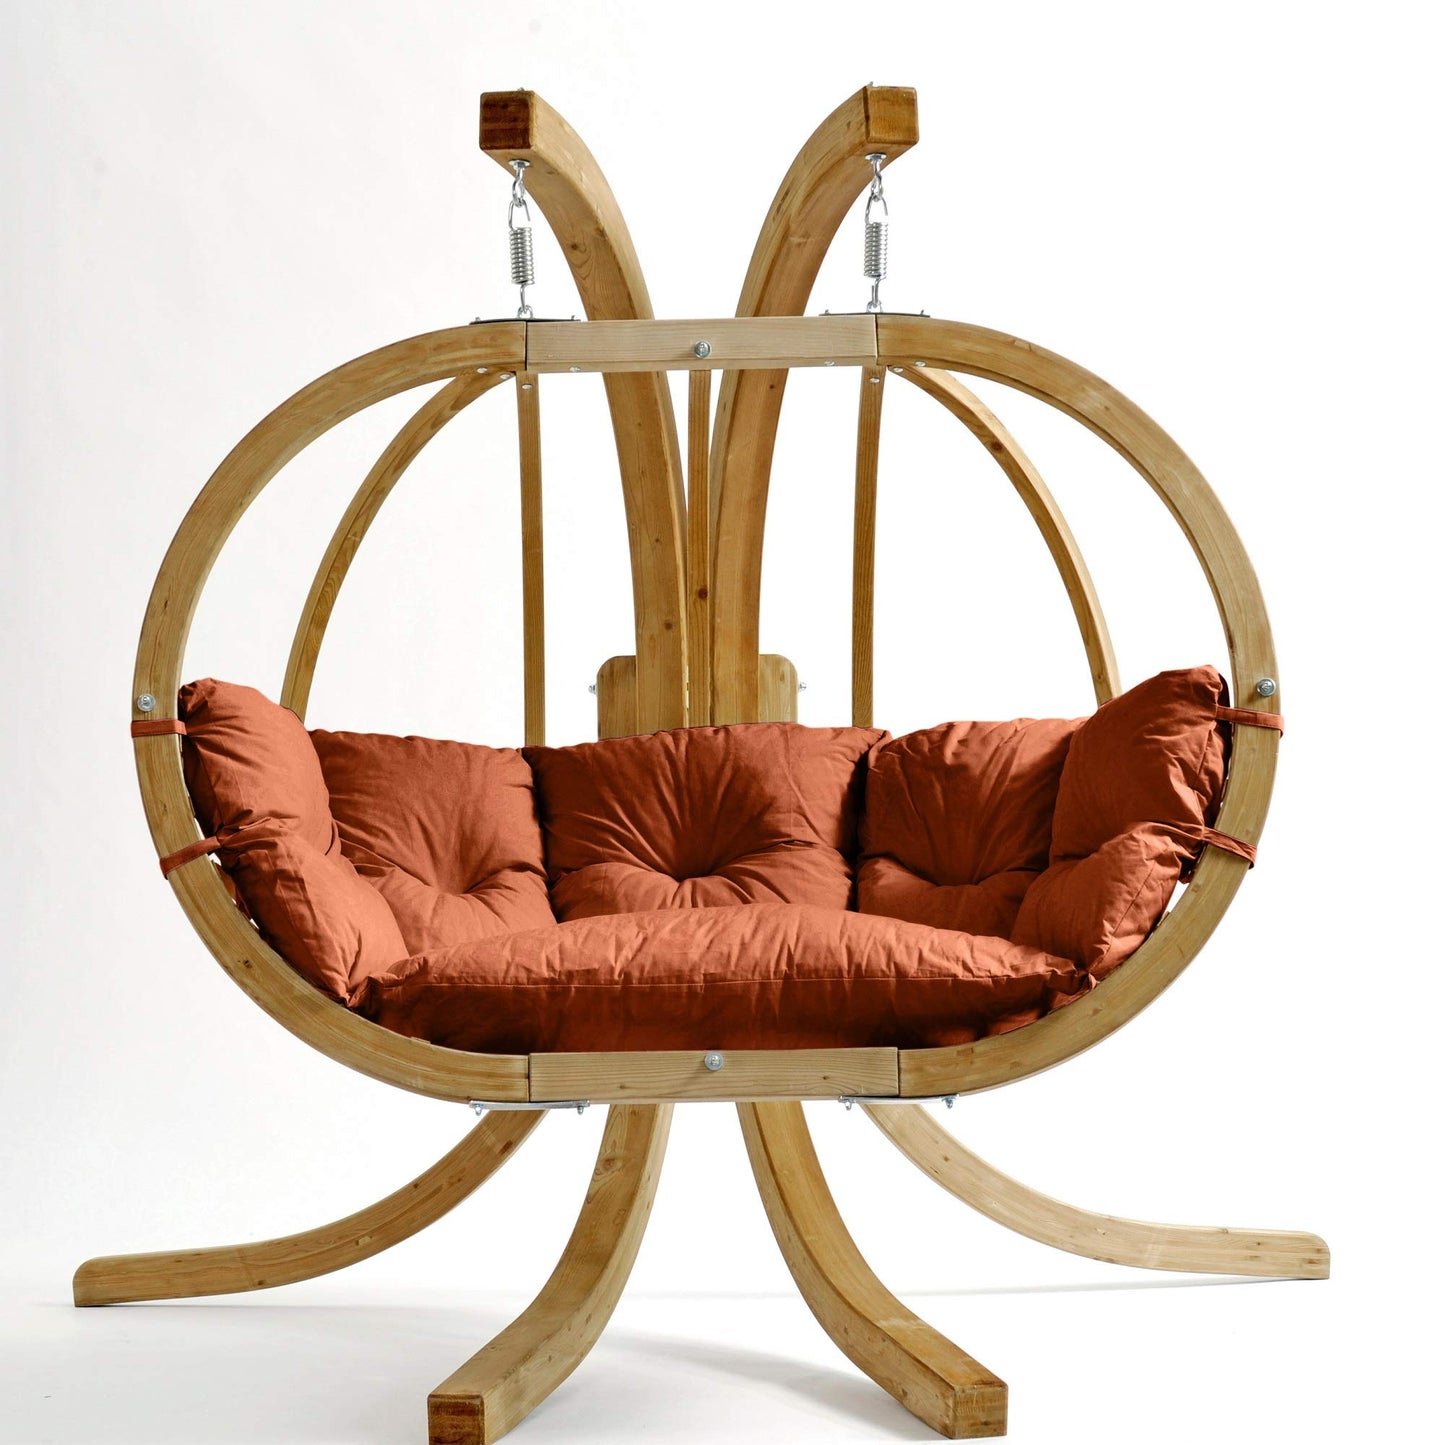 Double Globo Hanging Chair with Orange Cushions - Outdoor Living and Style